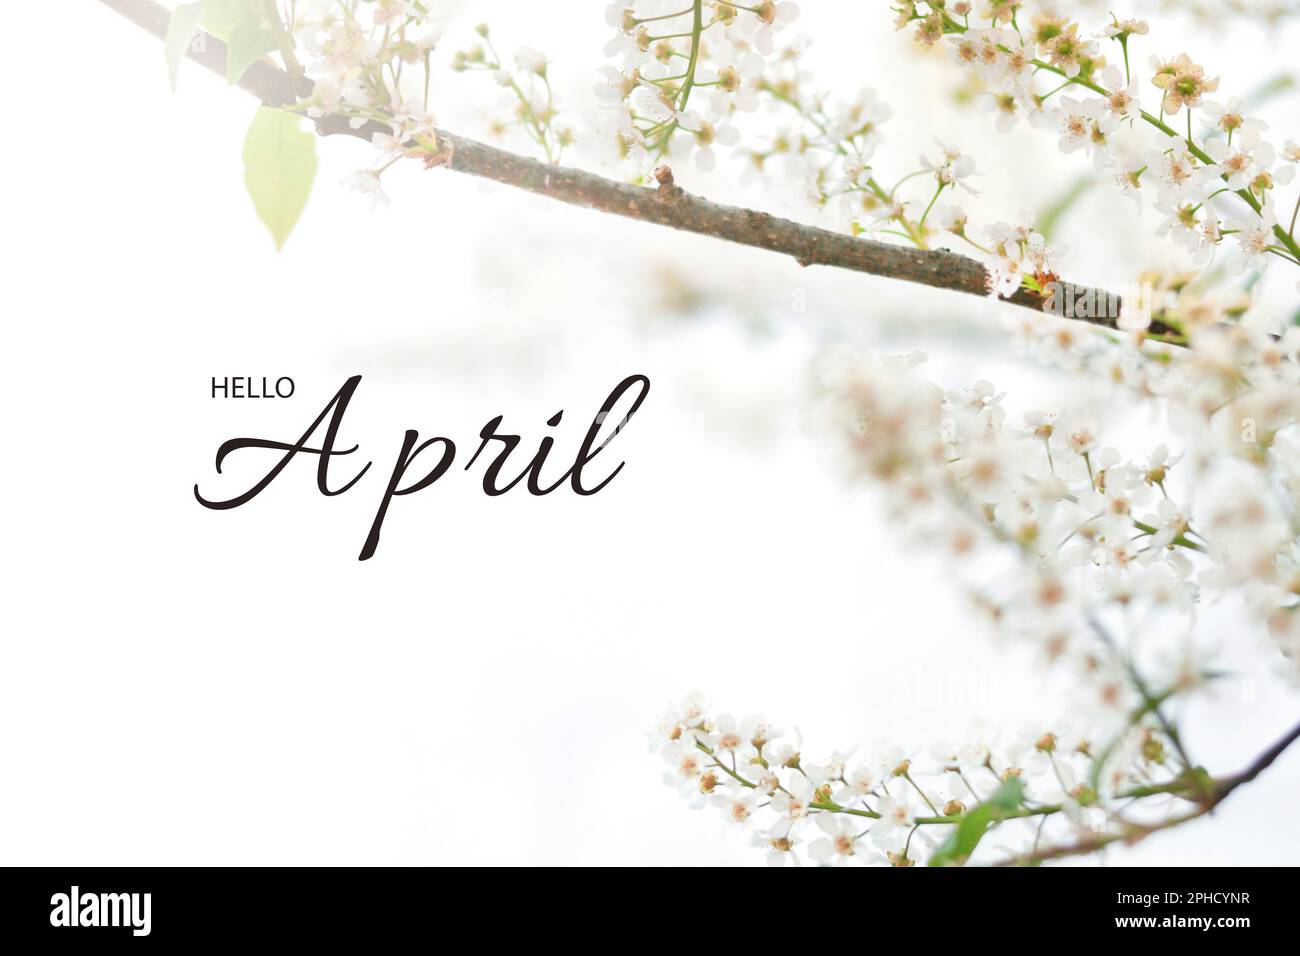 Symbols of spring mood - branches of Prunus padus, bird cherry, hackberry, hagberry, or Mayday treeand the inscription 'Hello April' on a white backgr Stock Photo